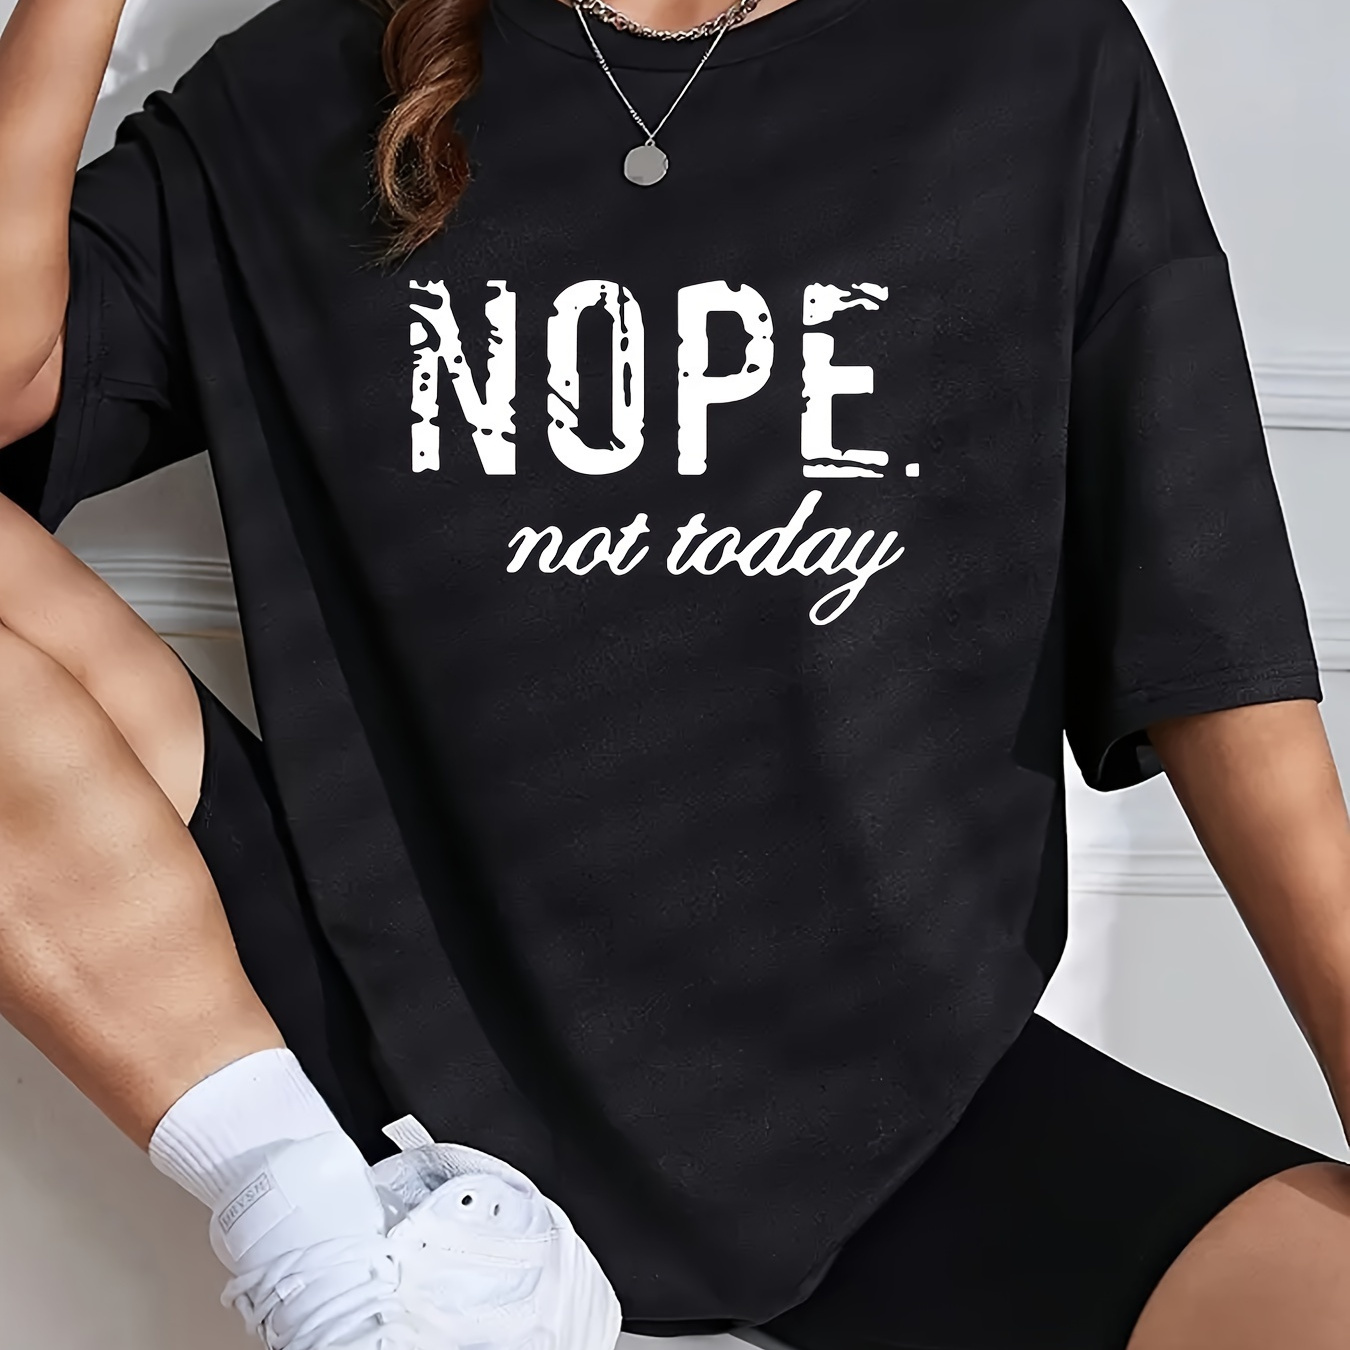 

Plus Size Letter Nope Print T-shirt, Casual Short Sleeve Top For Spring & Summer, Women's Plus Size Clothing